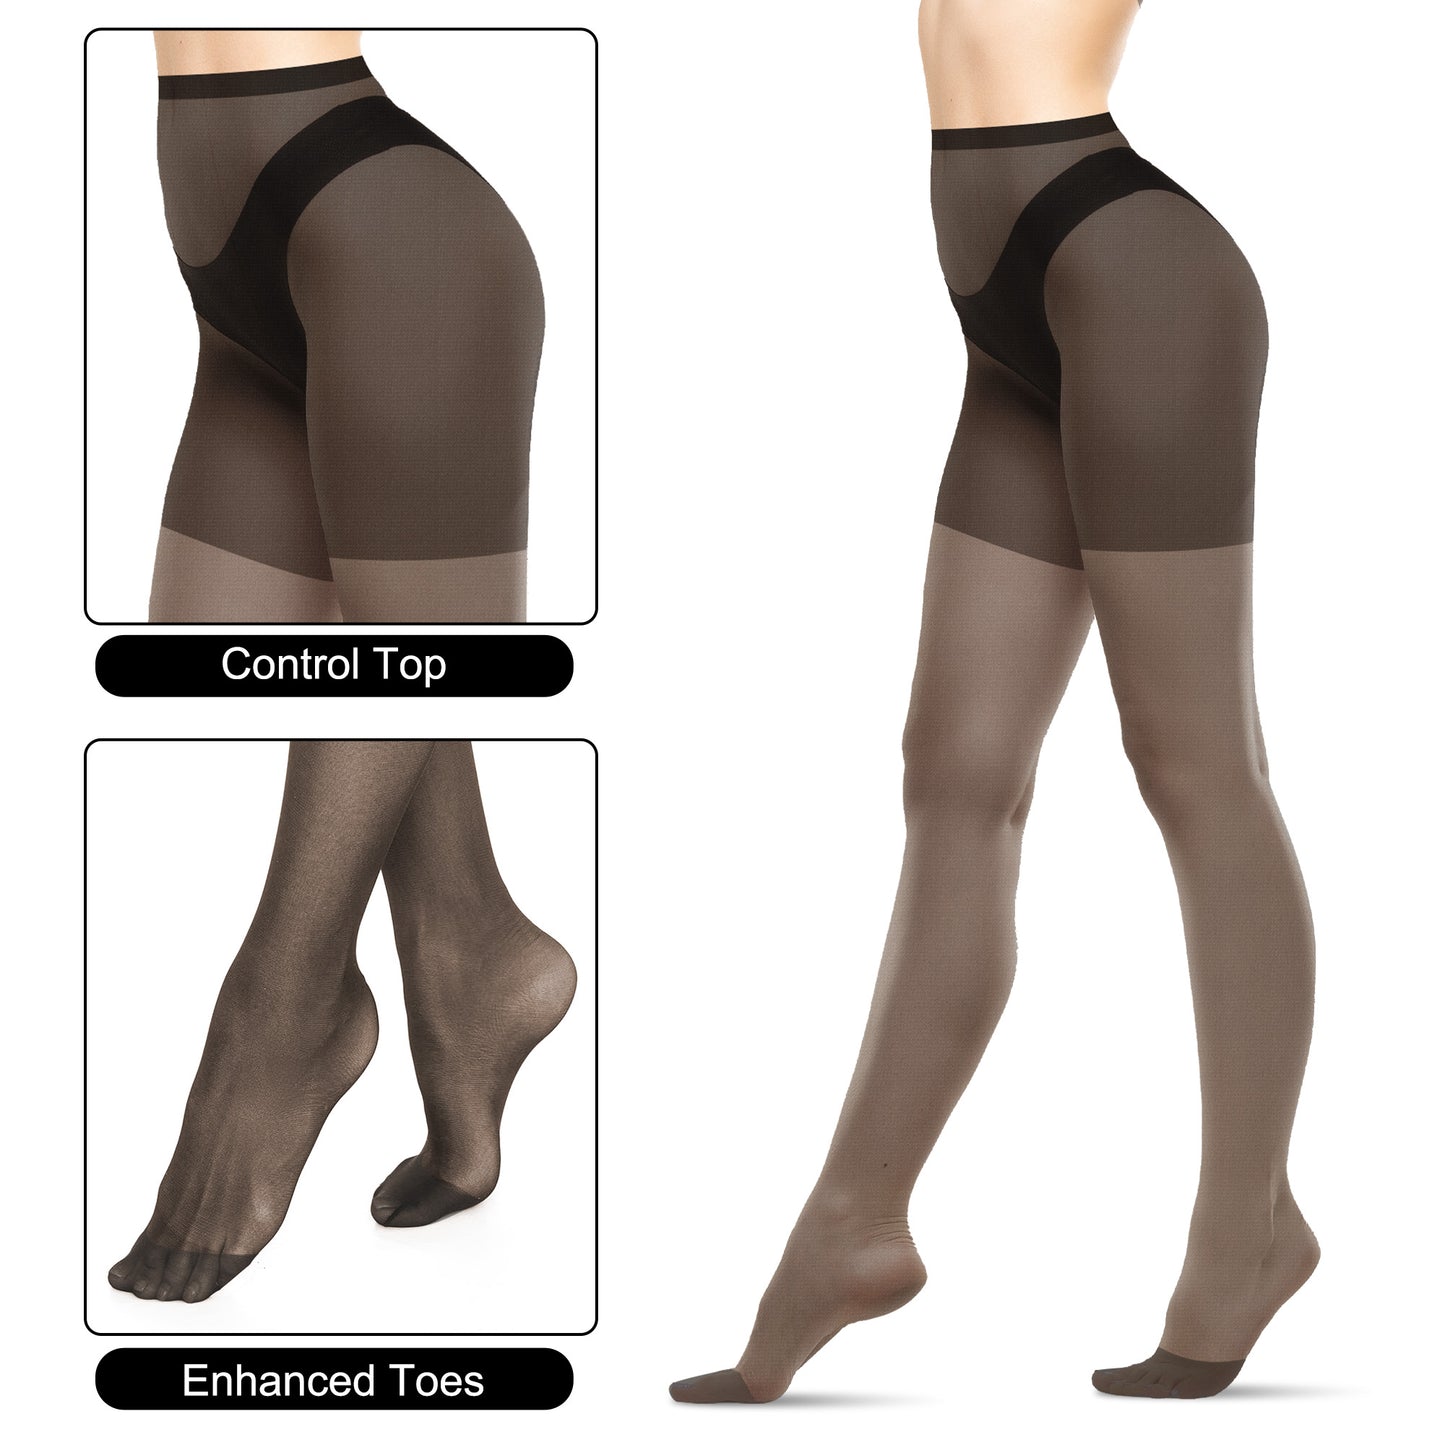 2 Pairs Women's Seamless Sheer Pantyhose - Sheer Tights,Control Top Pantyhose with Reinforced Toes (Black)